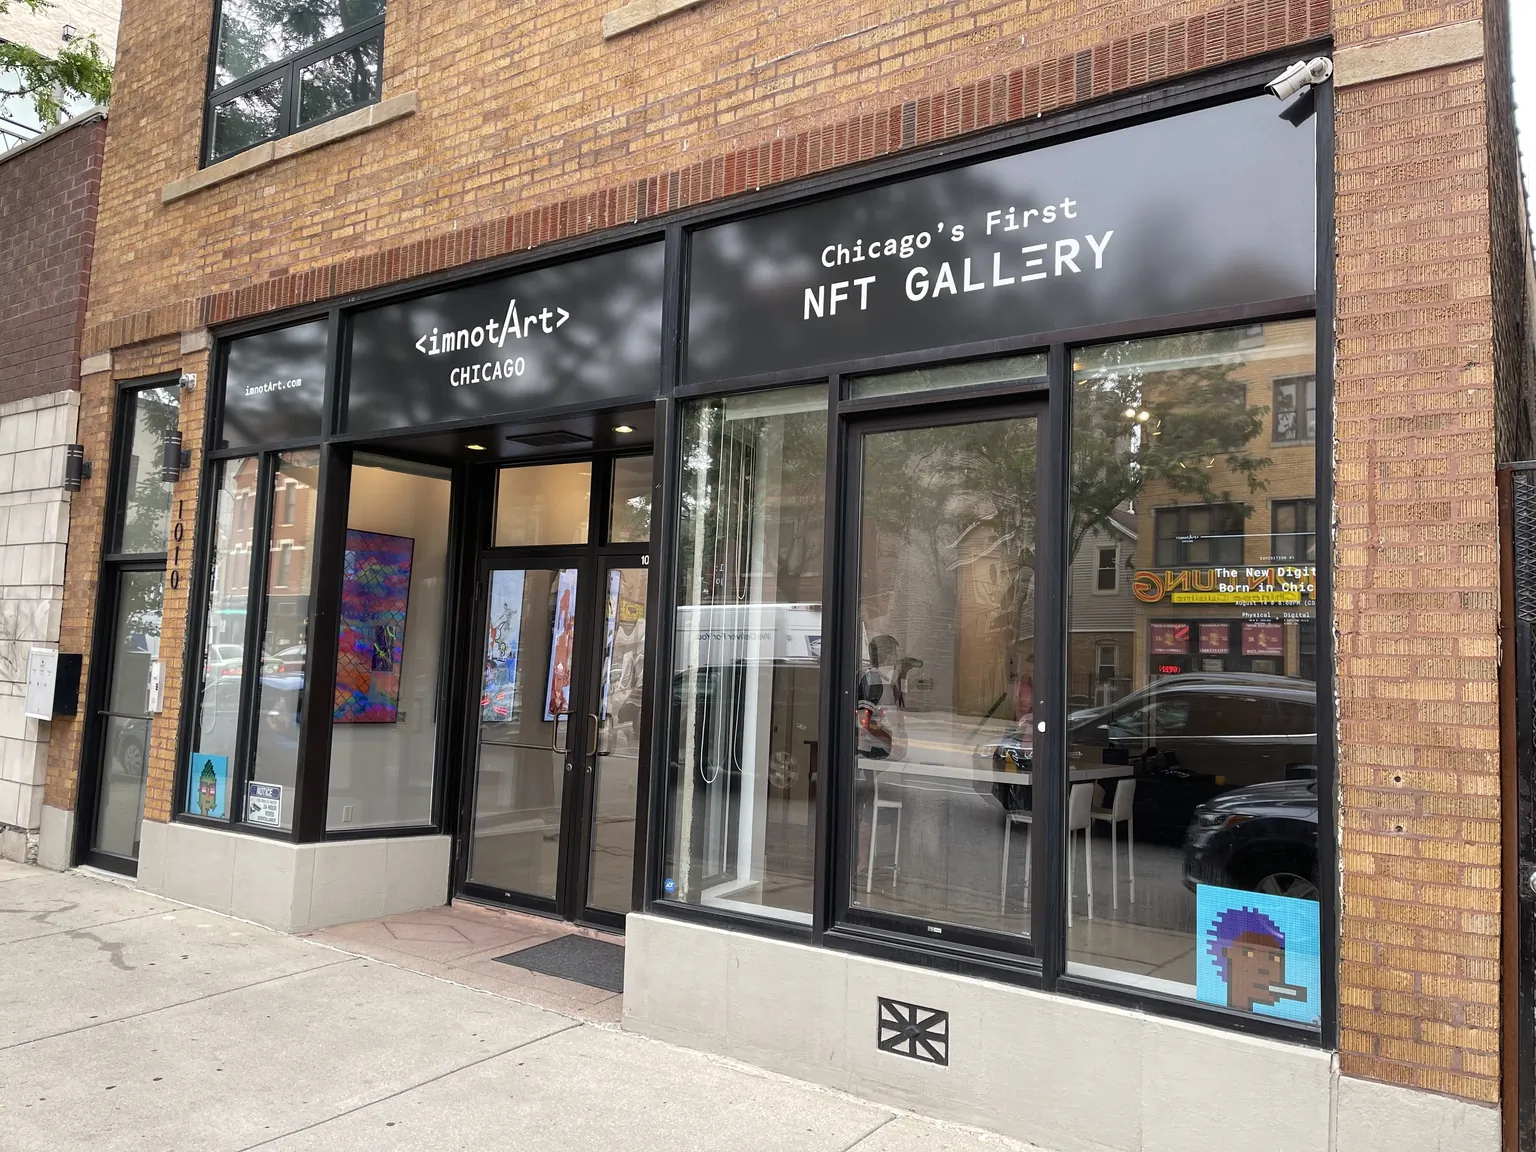 Outside view of Chicago's "first NFT gallery."